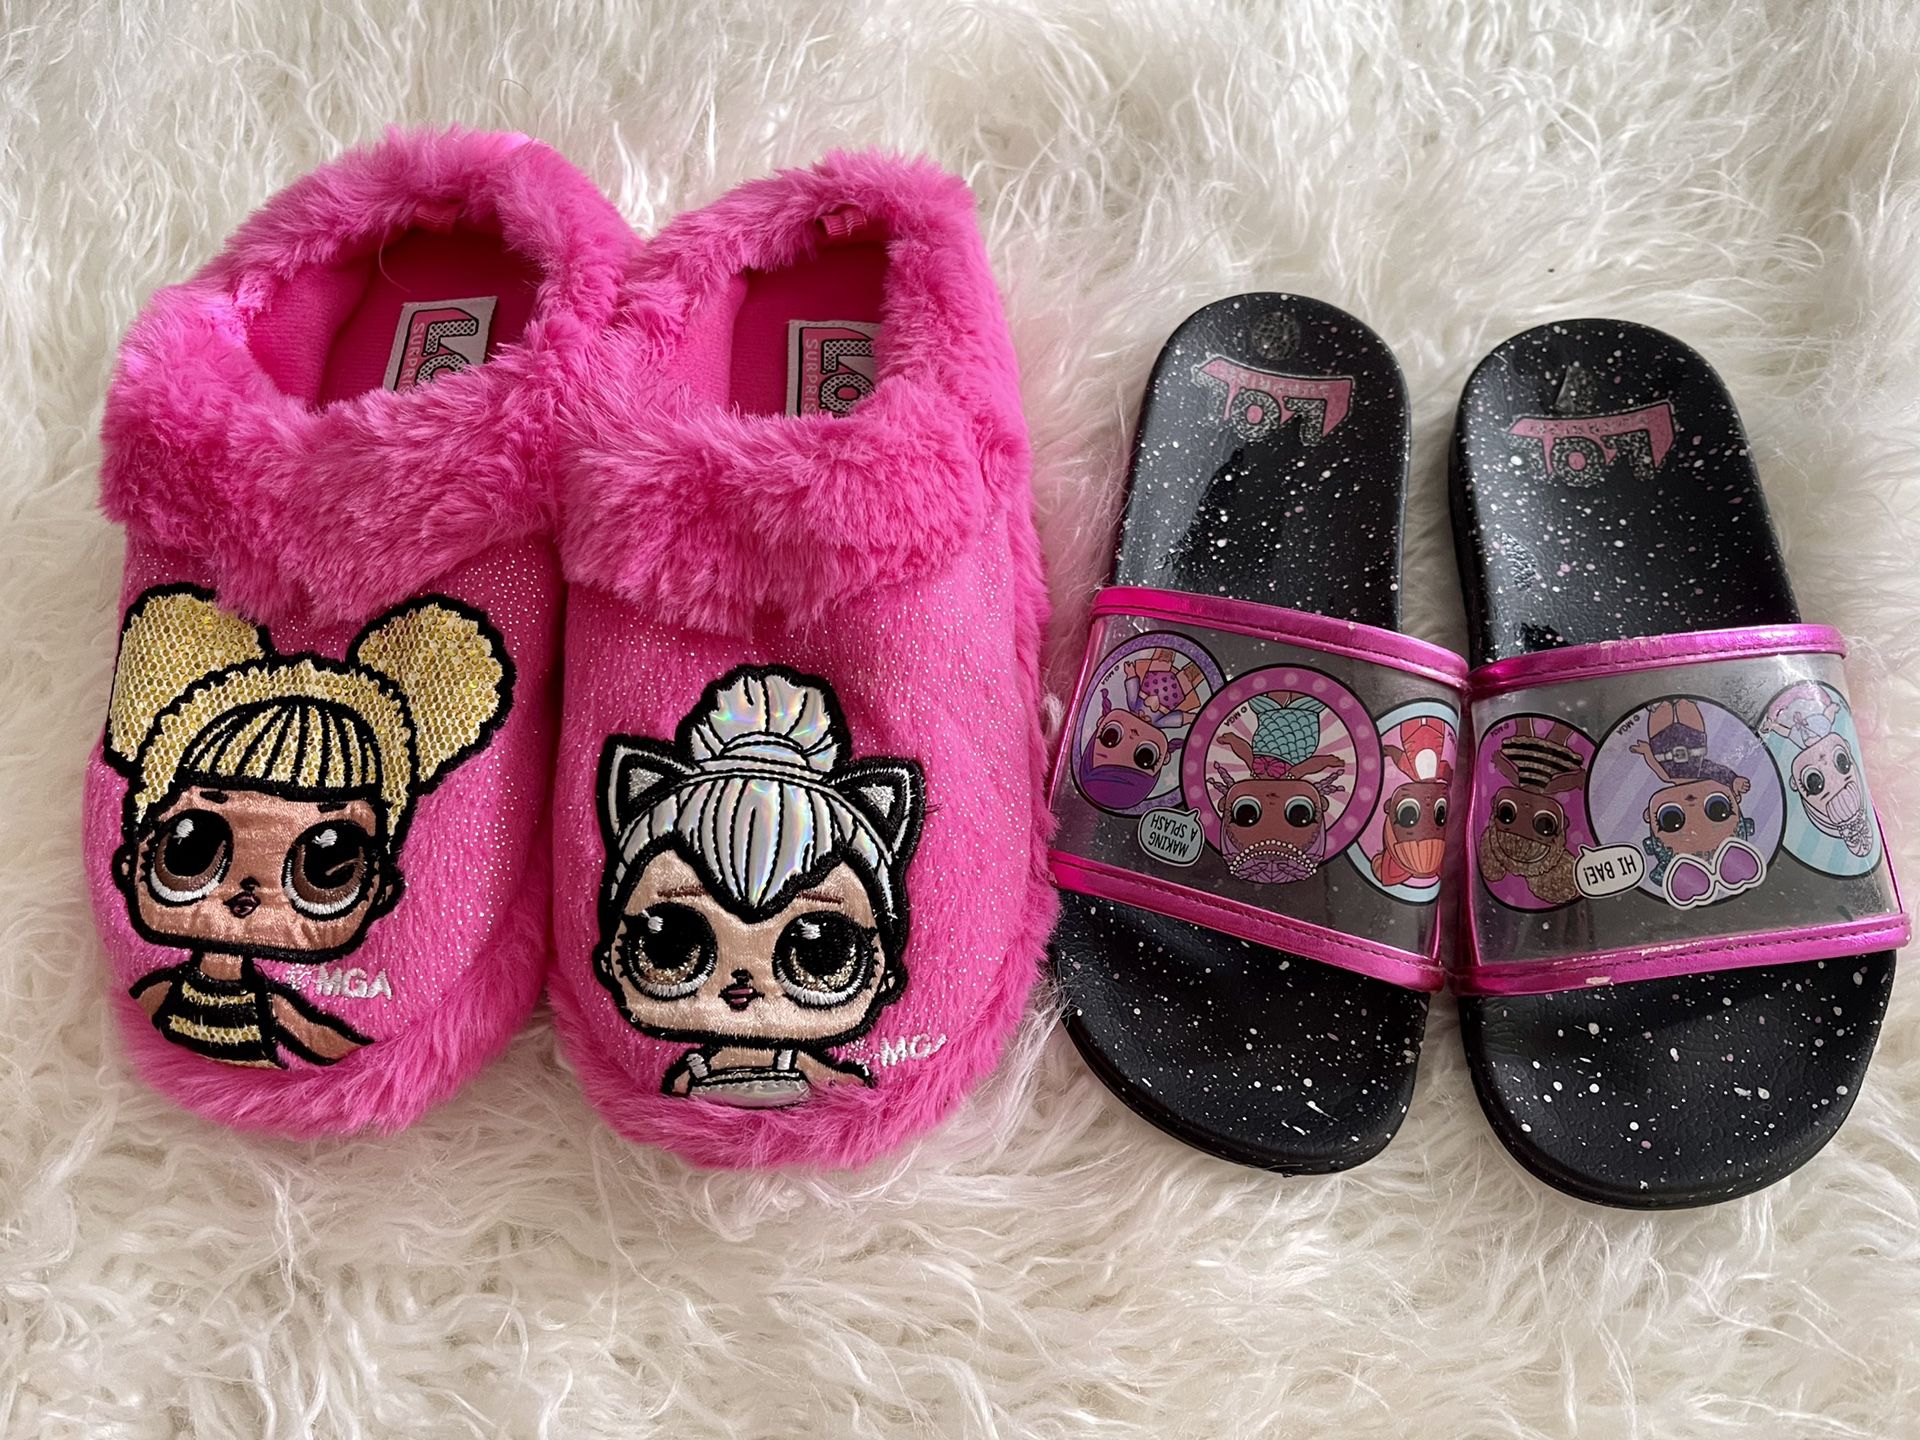 LOL Surprise slippers and slides size 13-1